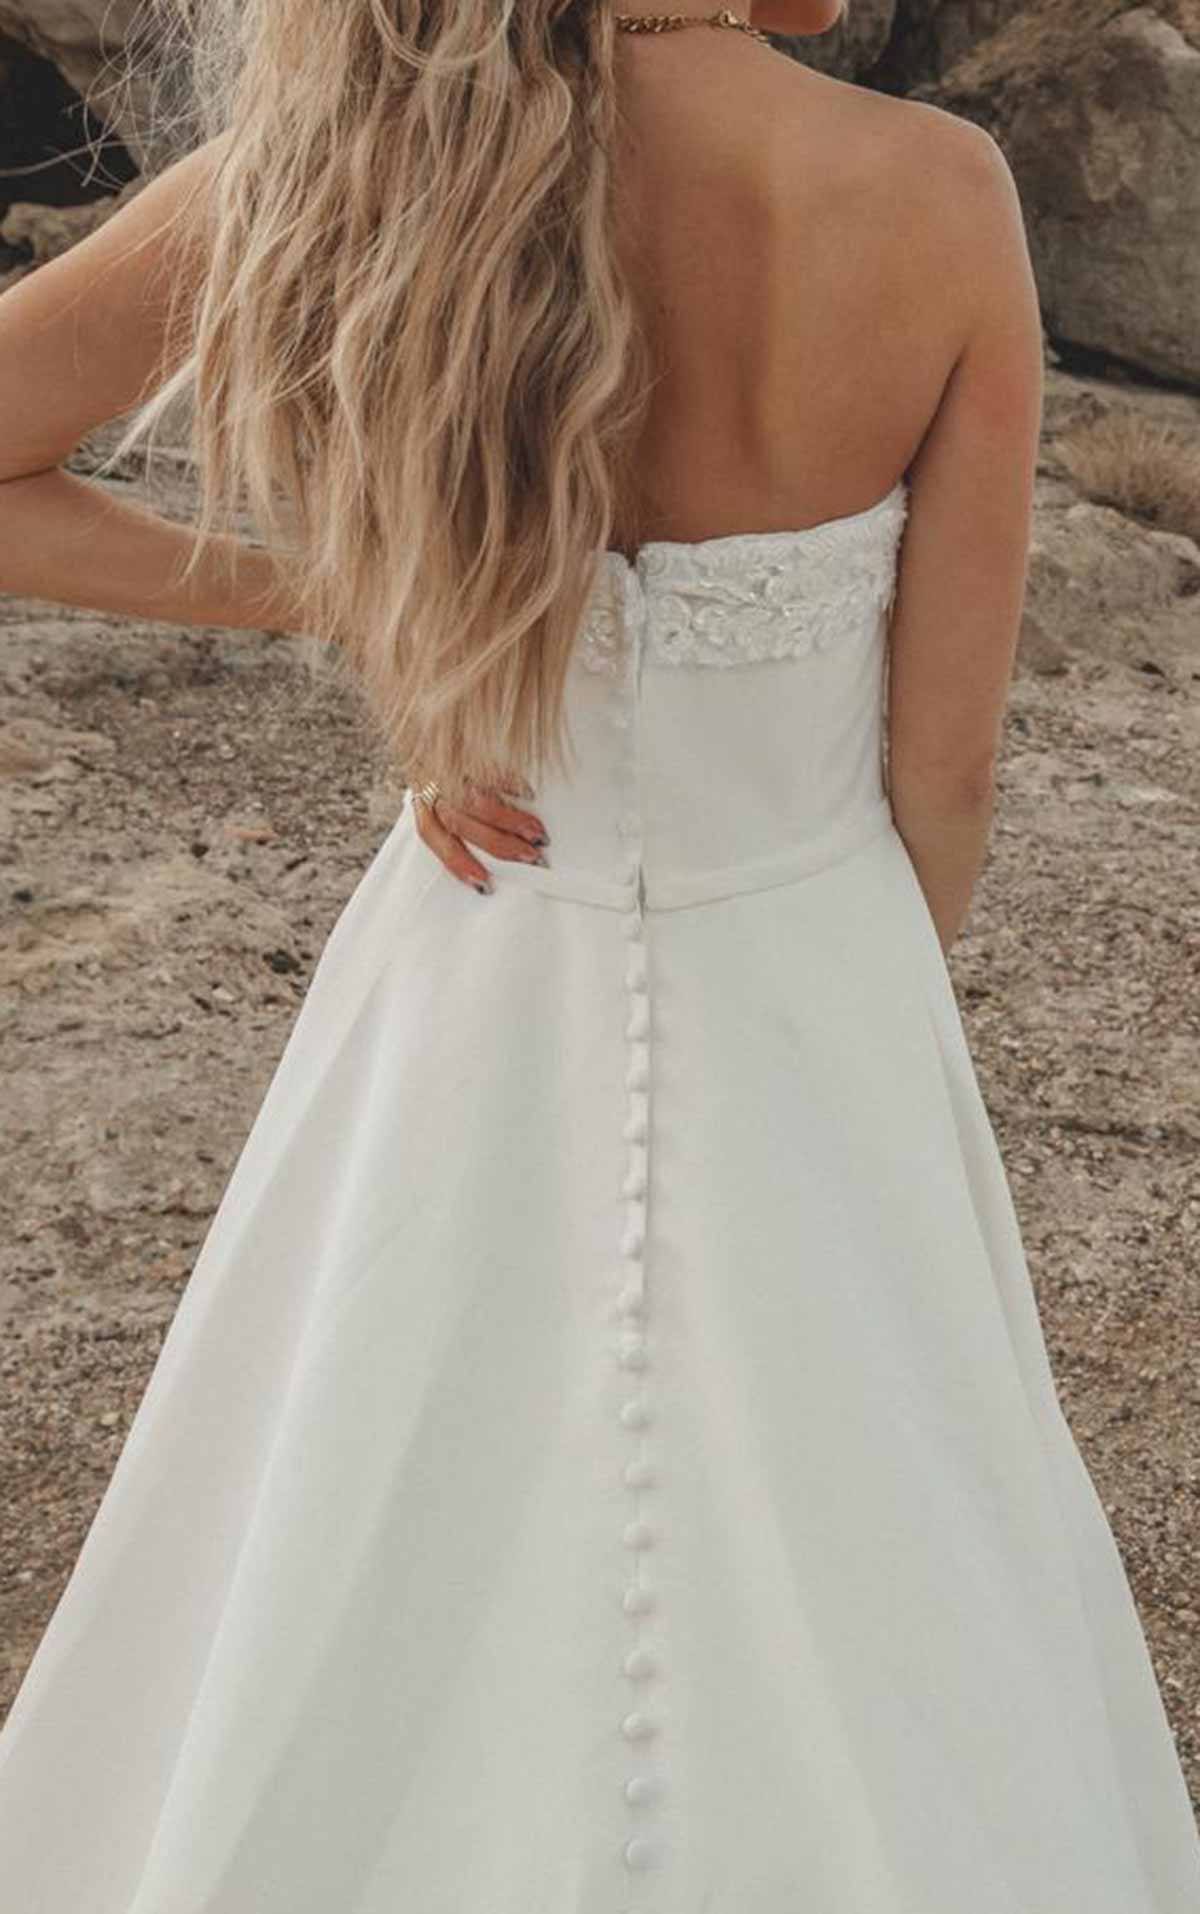 Strapless beaded ball gown for plus size brides - off the rack wedding dress